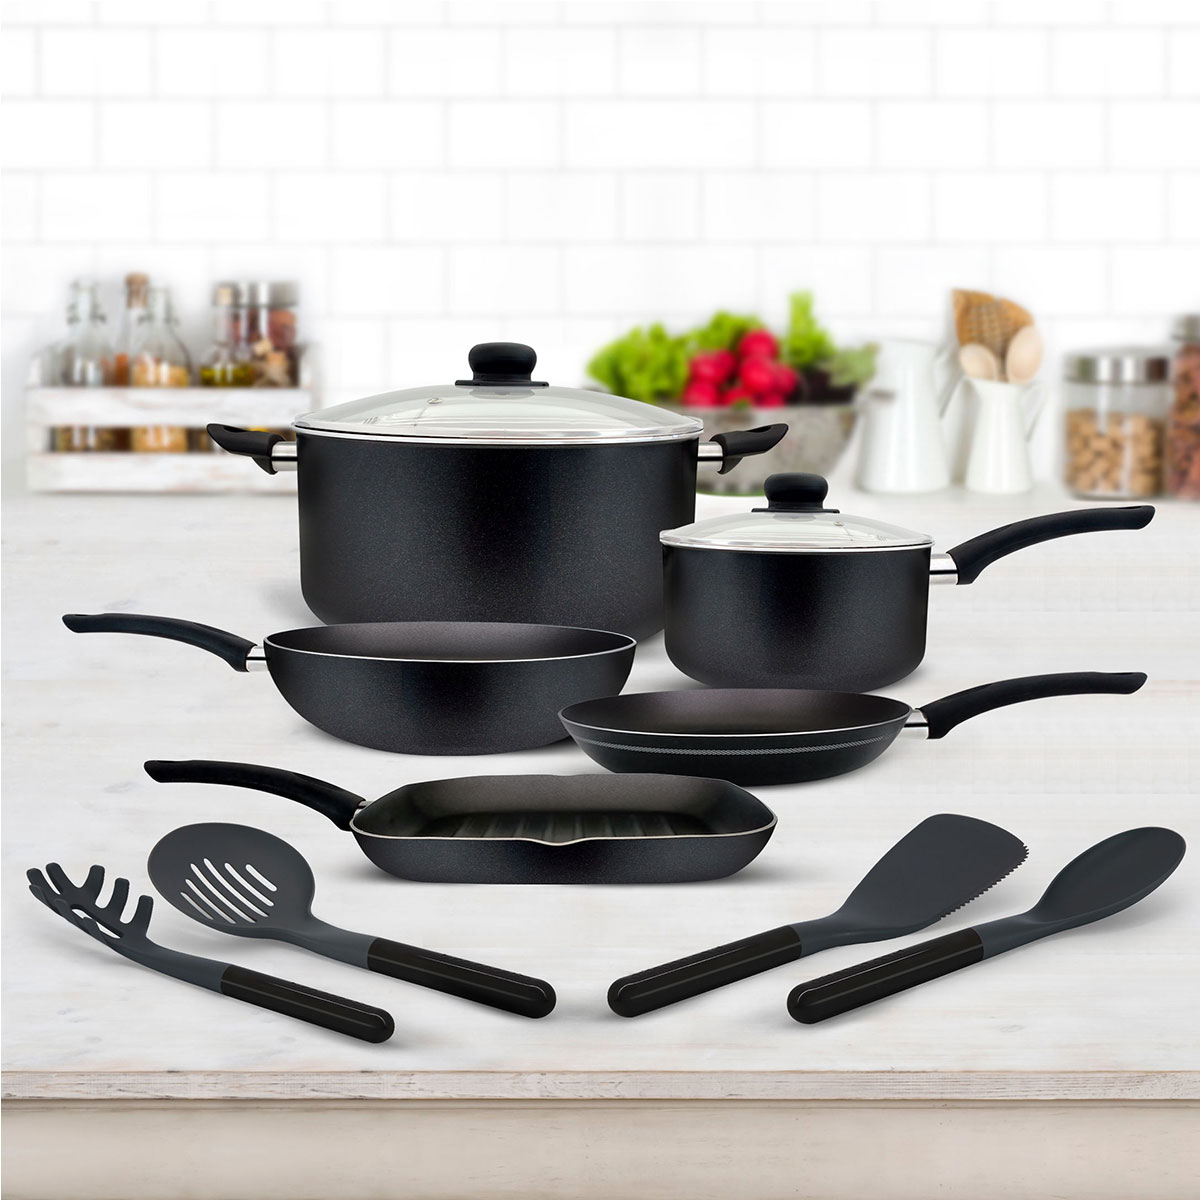 Rossetti Made in Italy Best Cookware sets Dubai UAE